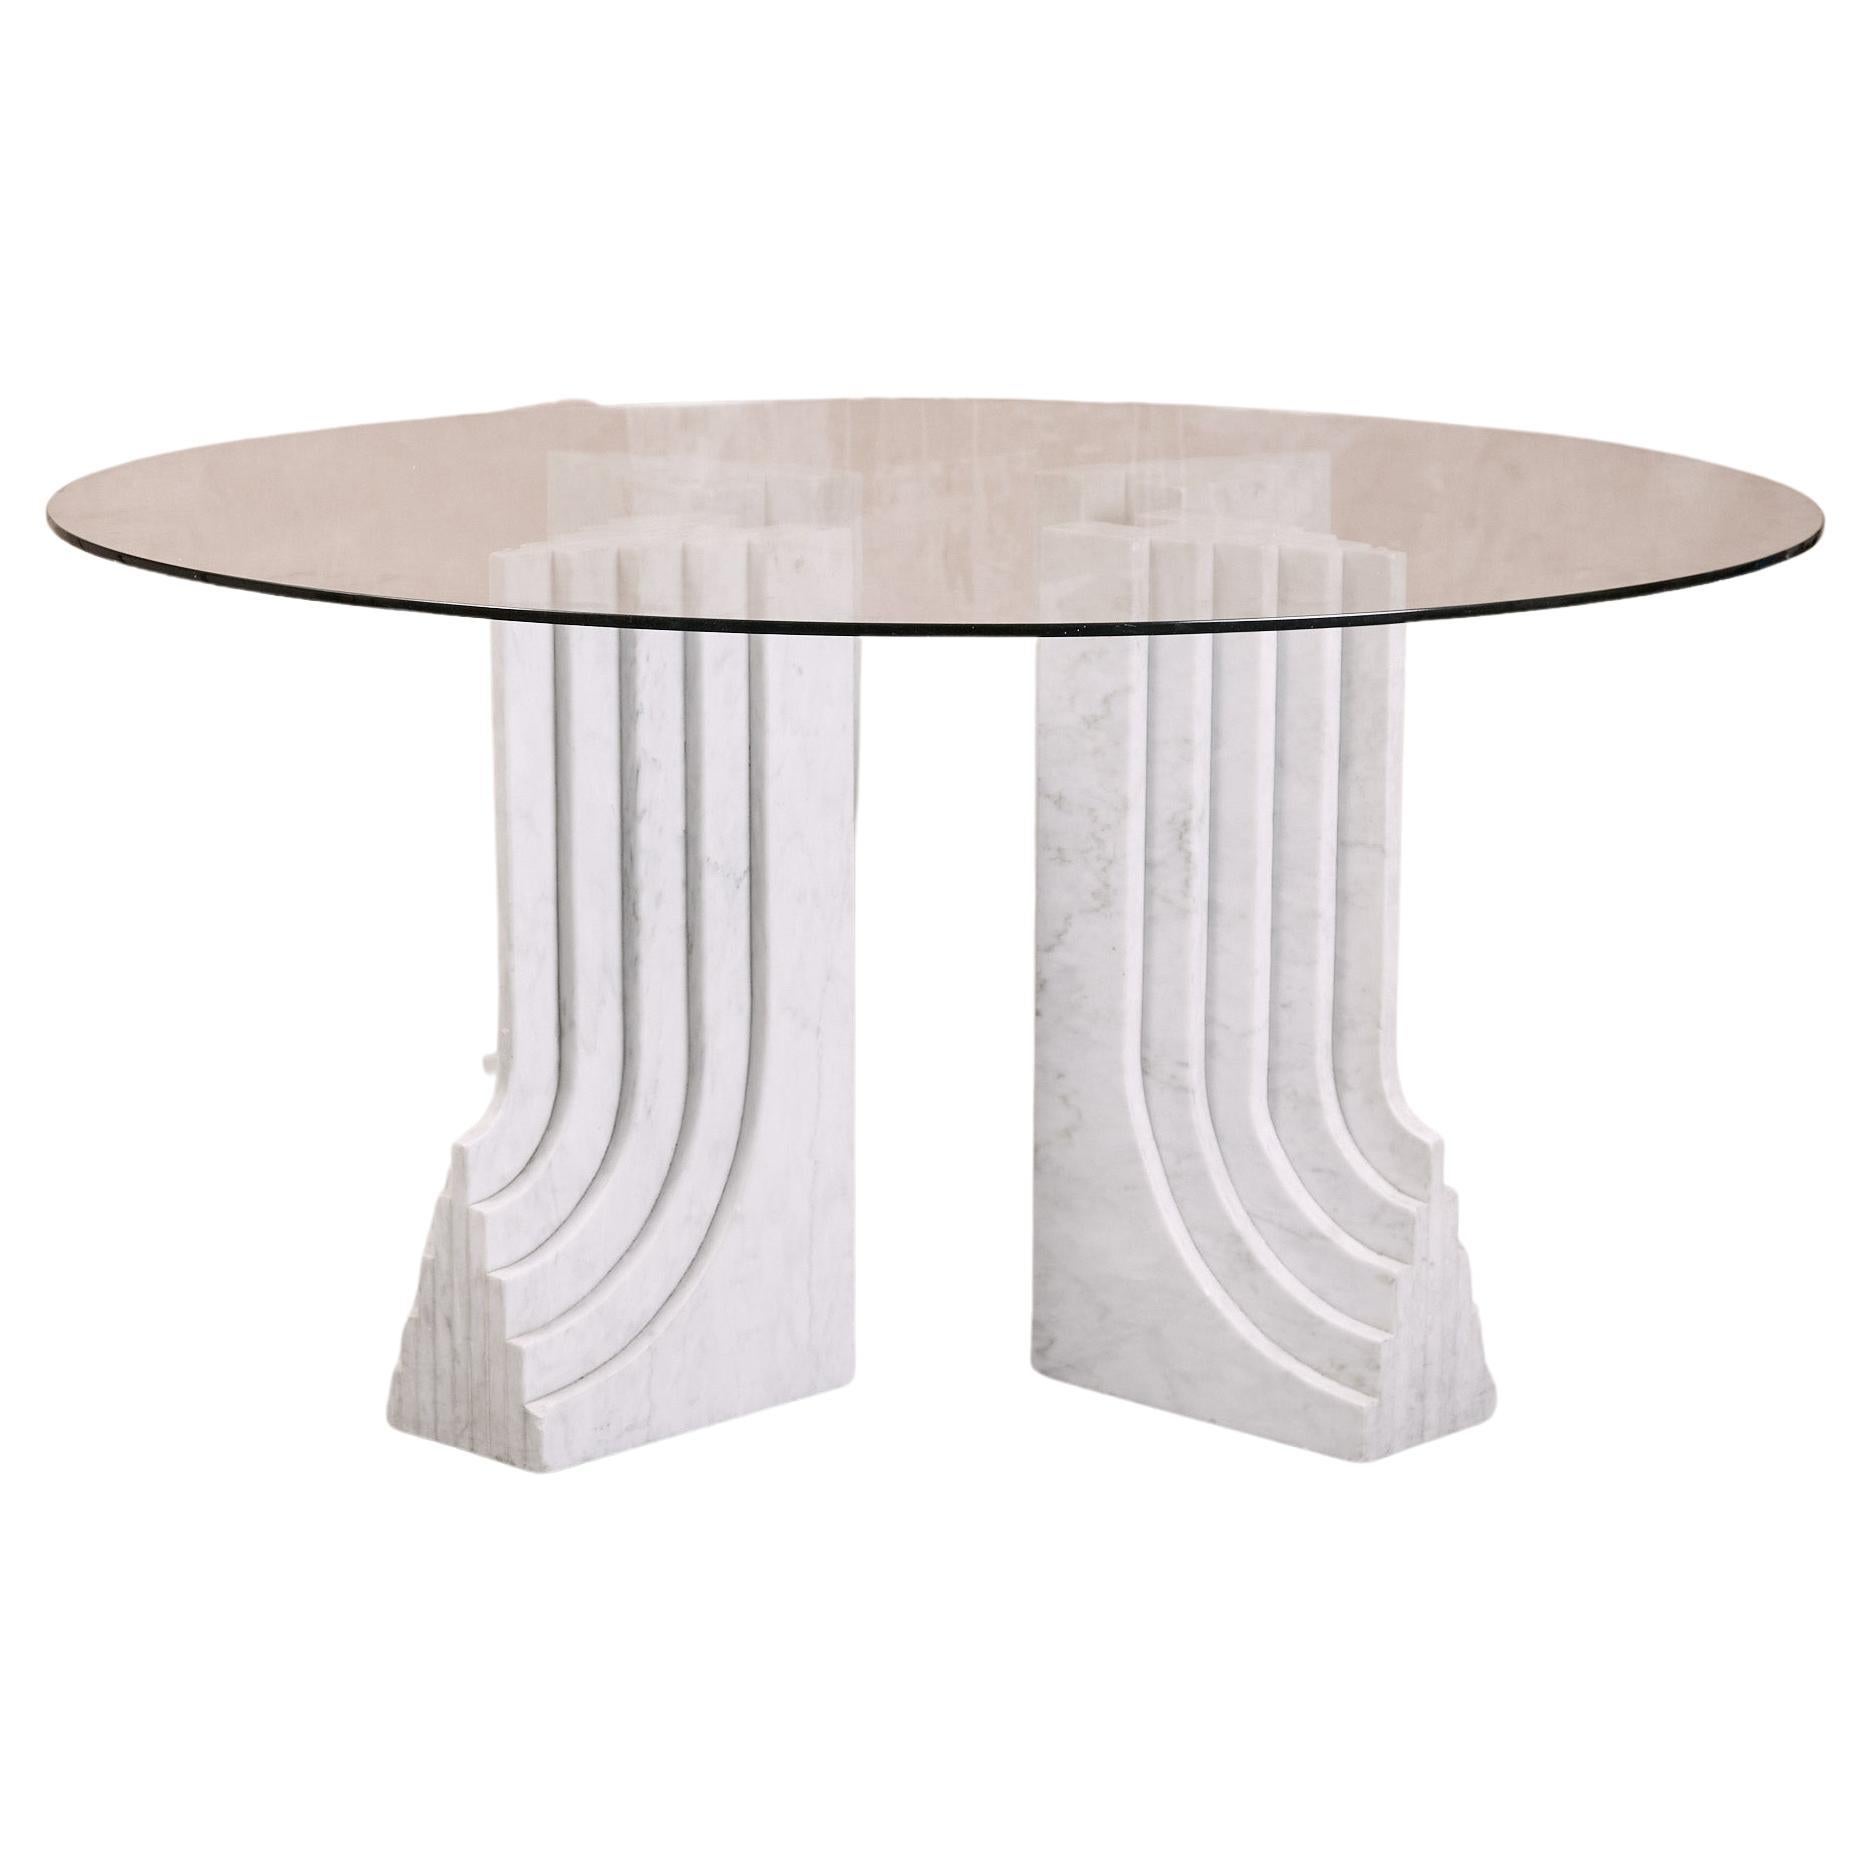 Large Marble and Glass Table, After Carlo Scarpa Samo, 1970s For Sale